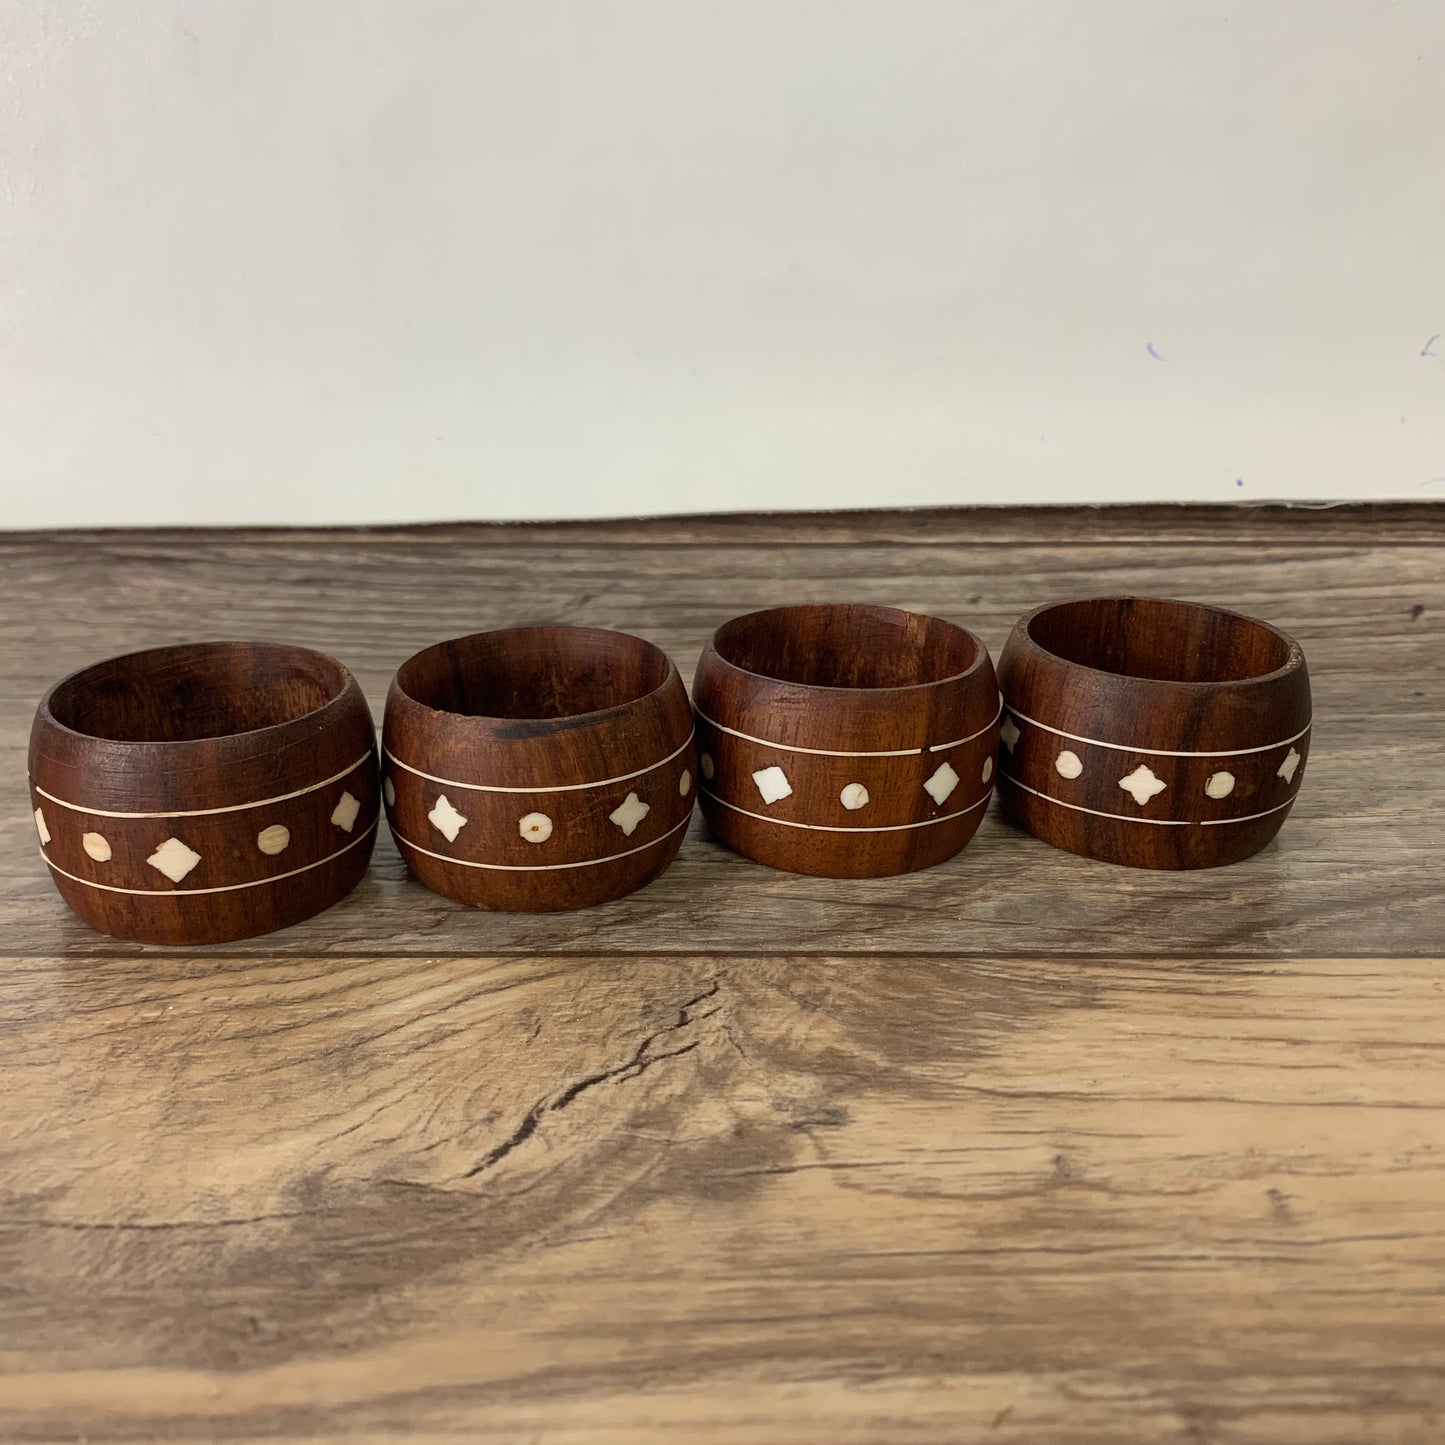 Wood Napkin Rings with Inlaid Design set of 4 Vintage Wooden Napkin Rings